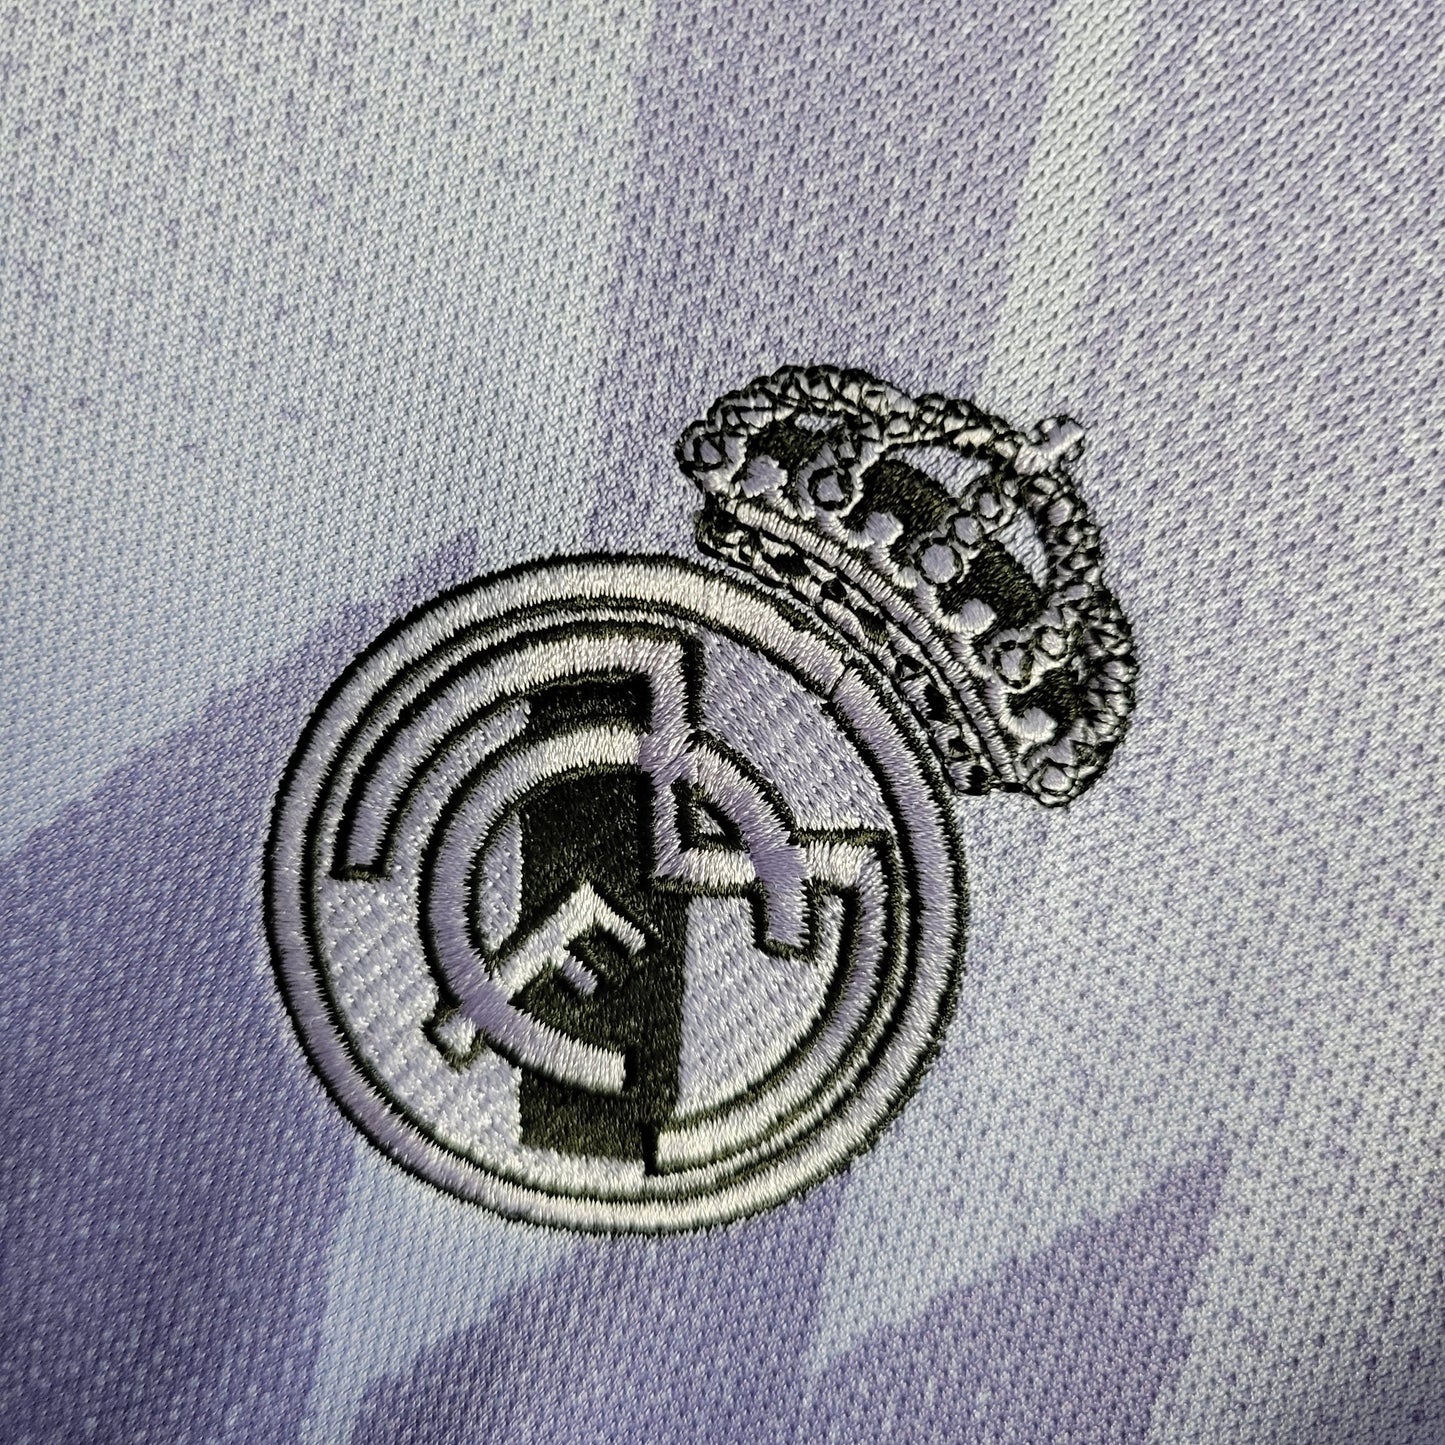 Maillot Extérieur Real Madrid 2022-2023